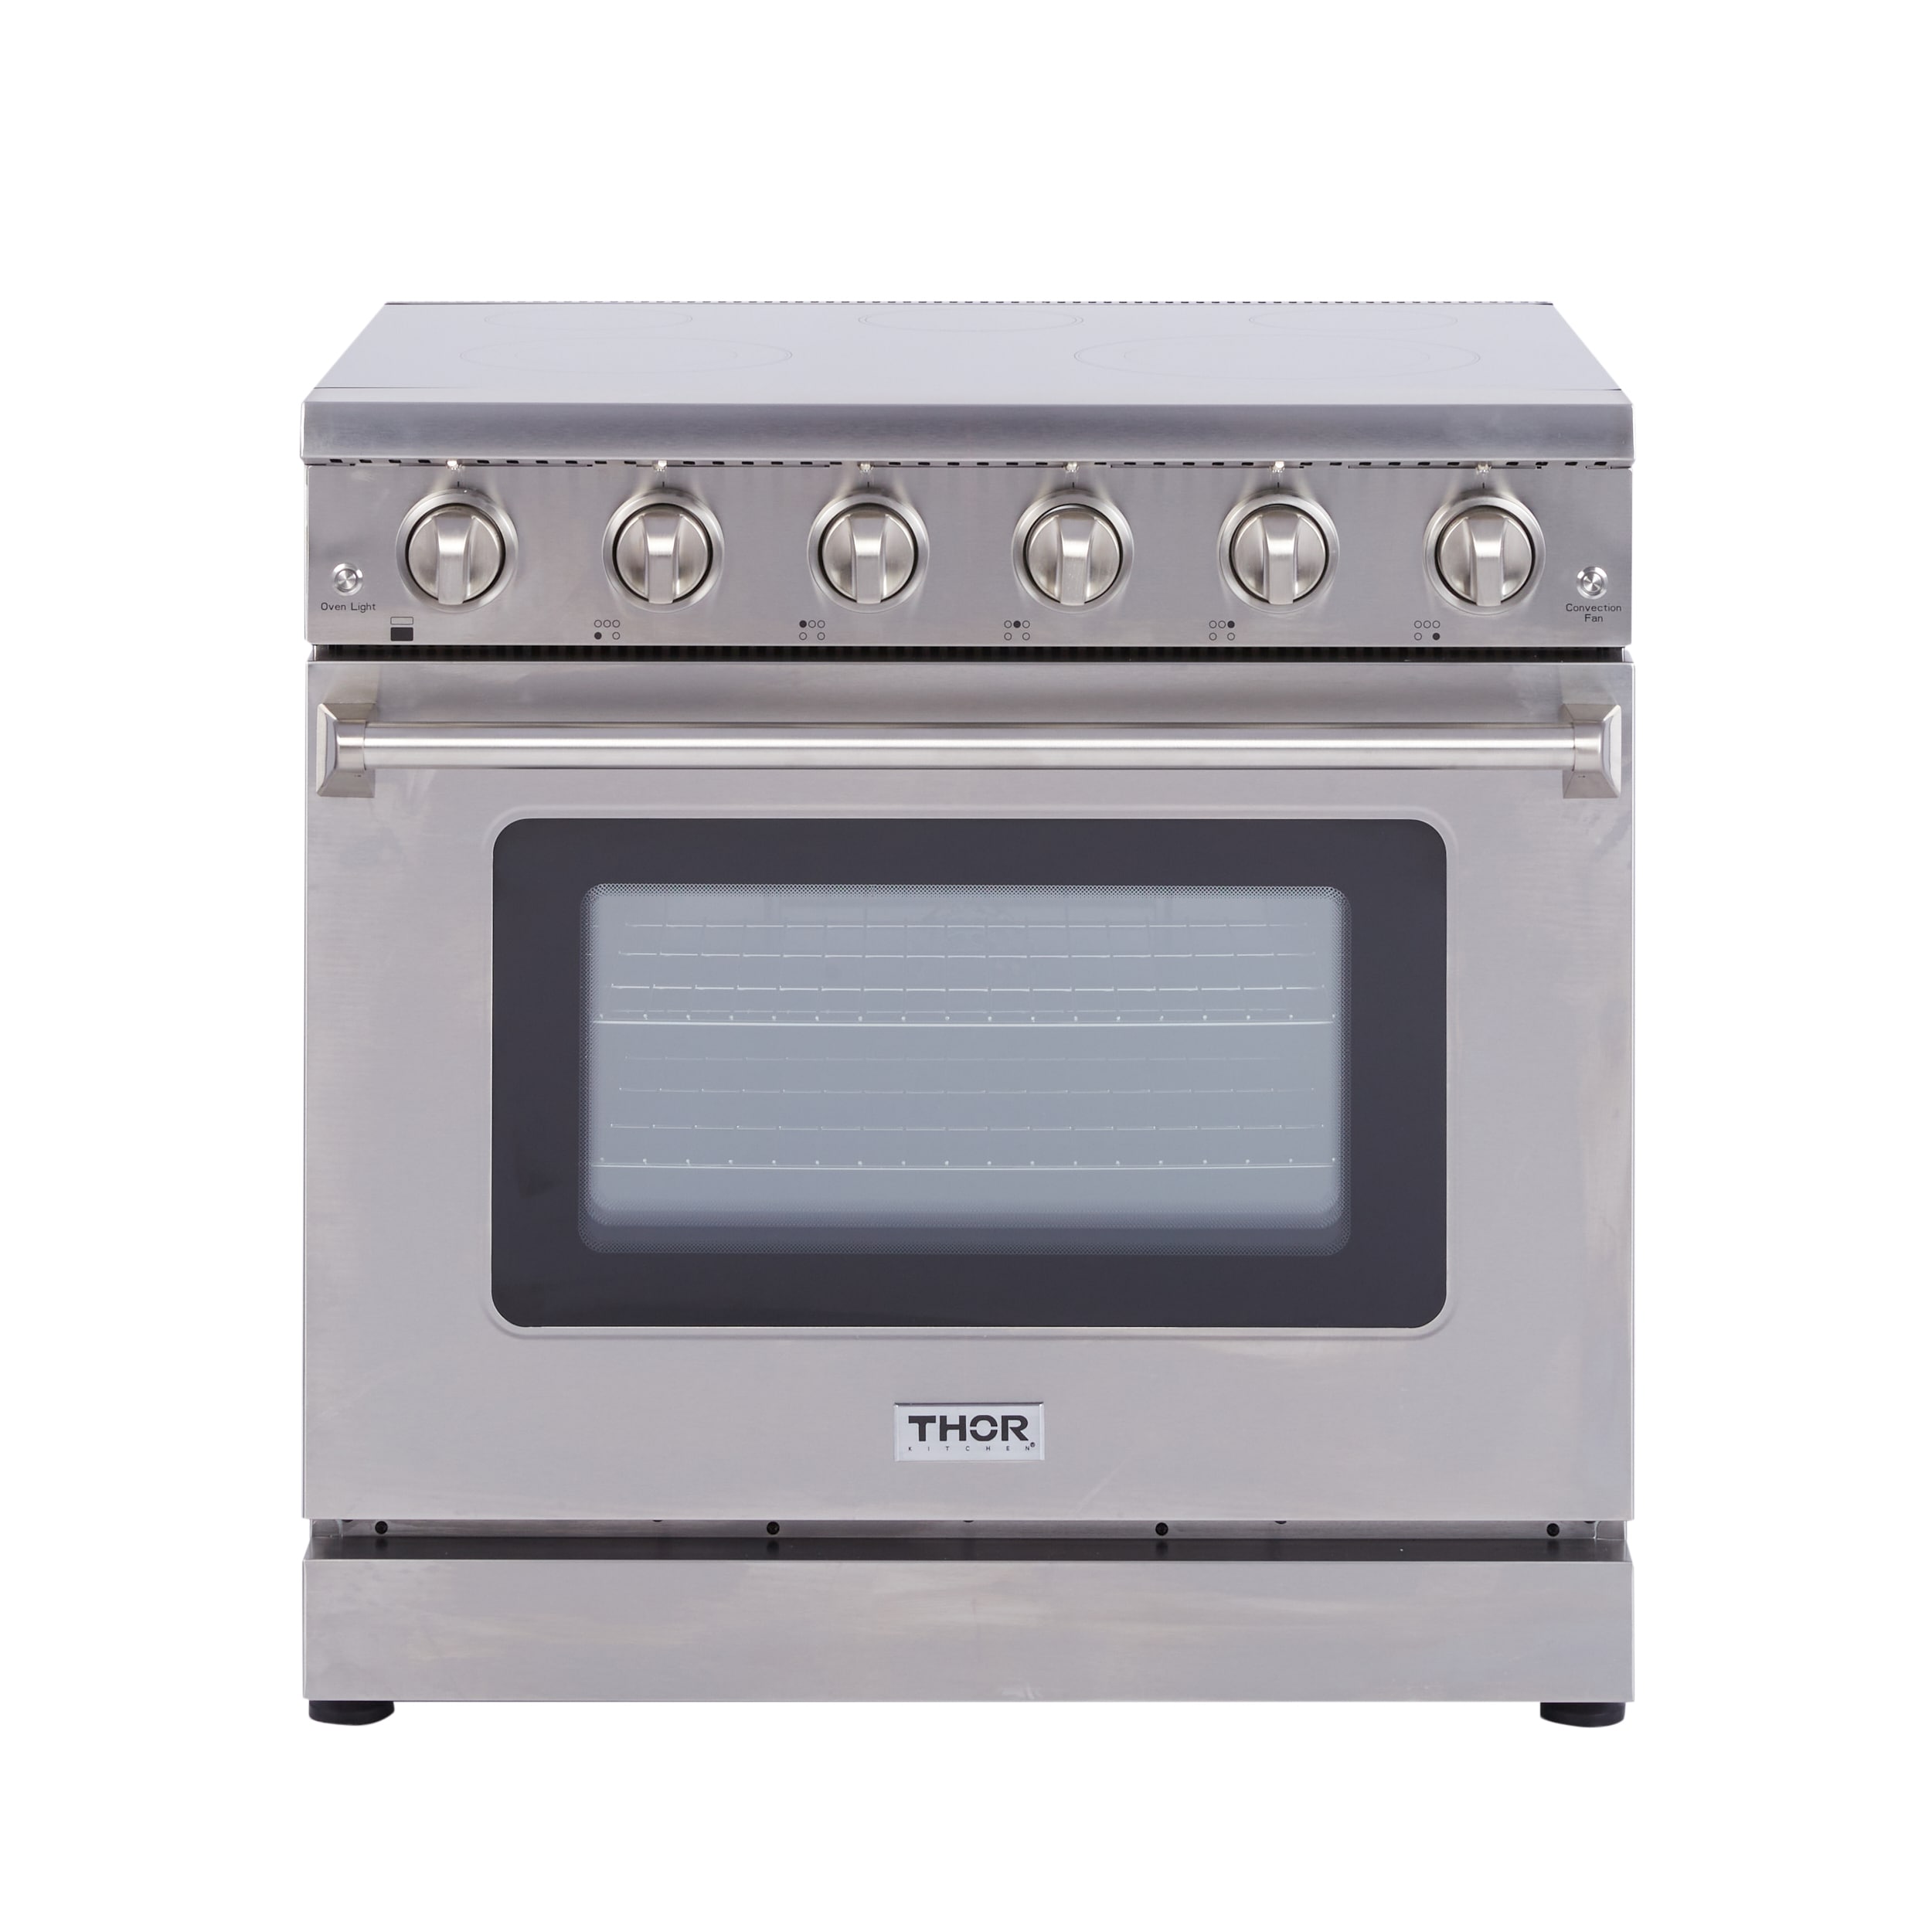  KOSTCH 36 inch Professional Electric Range with 5